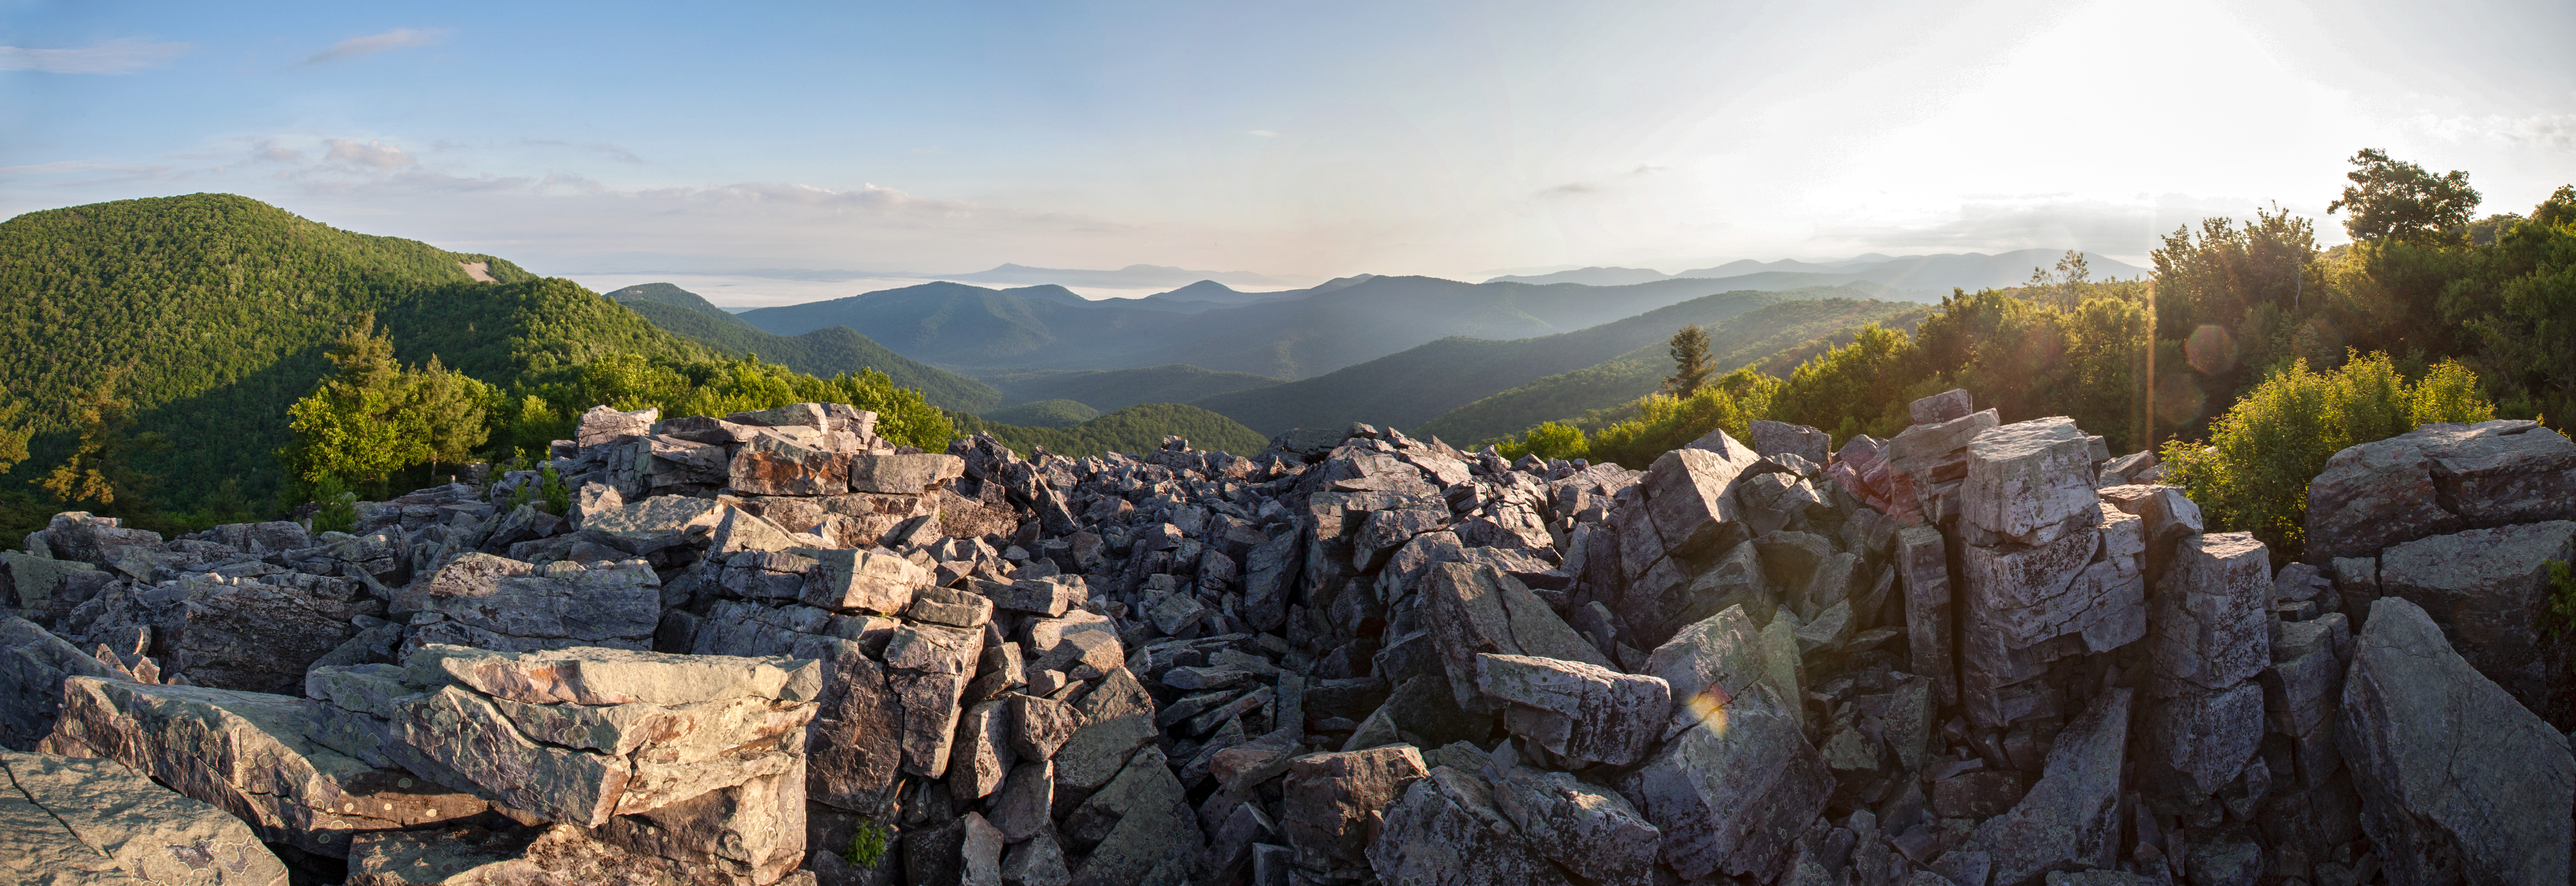 Blackrock Summit, Skyline Drive MP 84.8. Photo by Sarah Hauser and courtesy of Virginia Tourism Corporation.